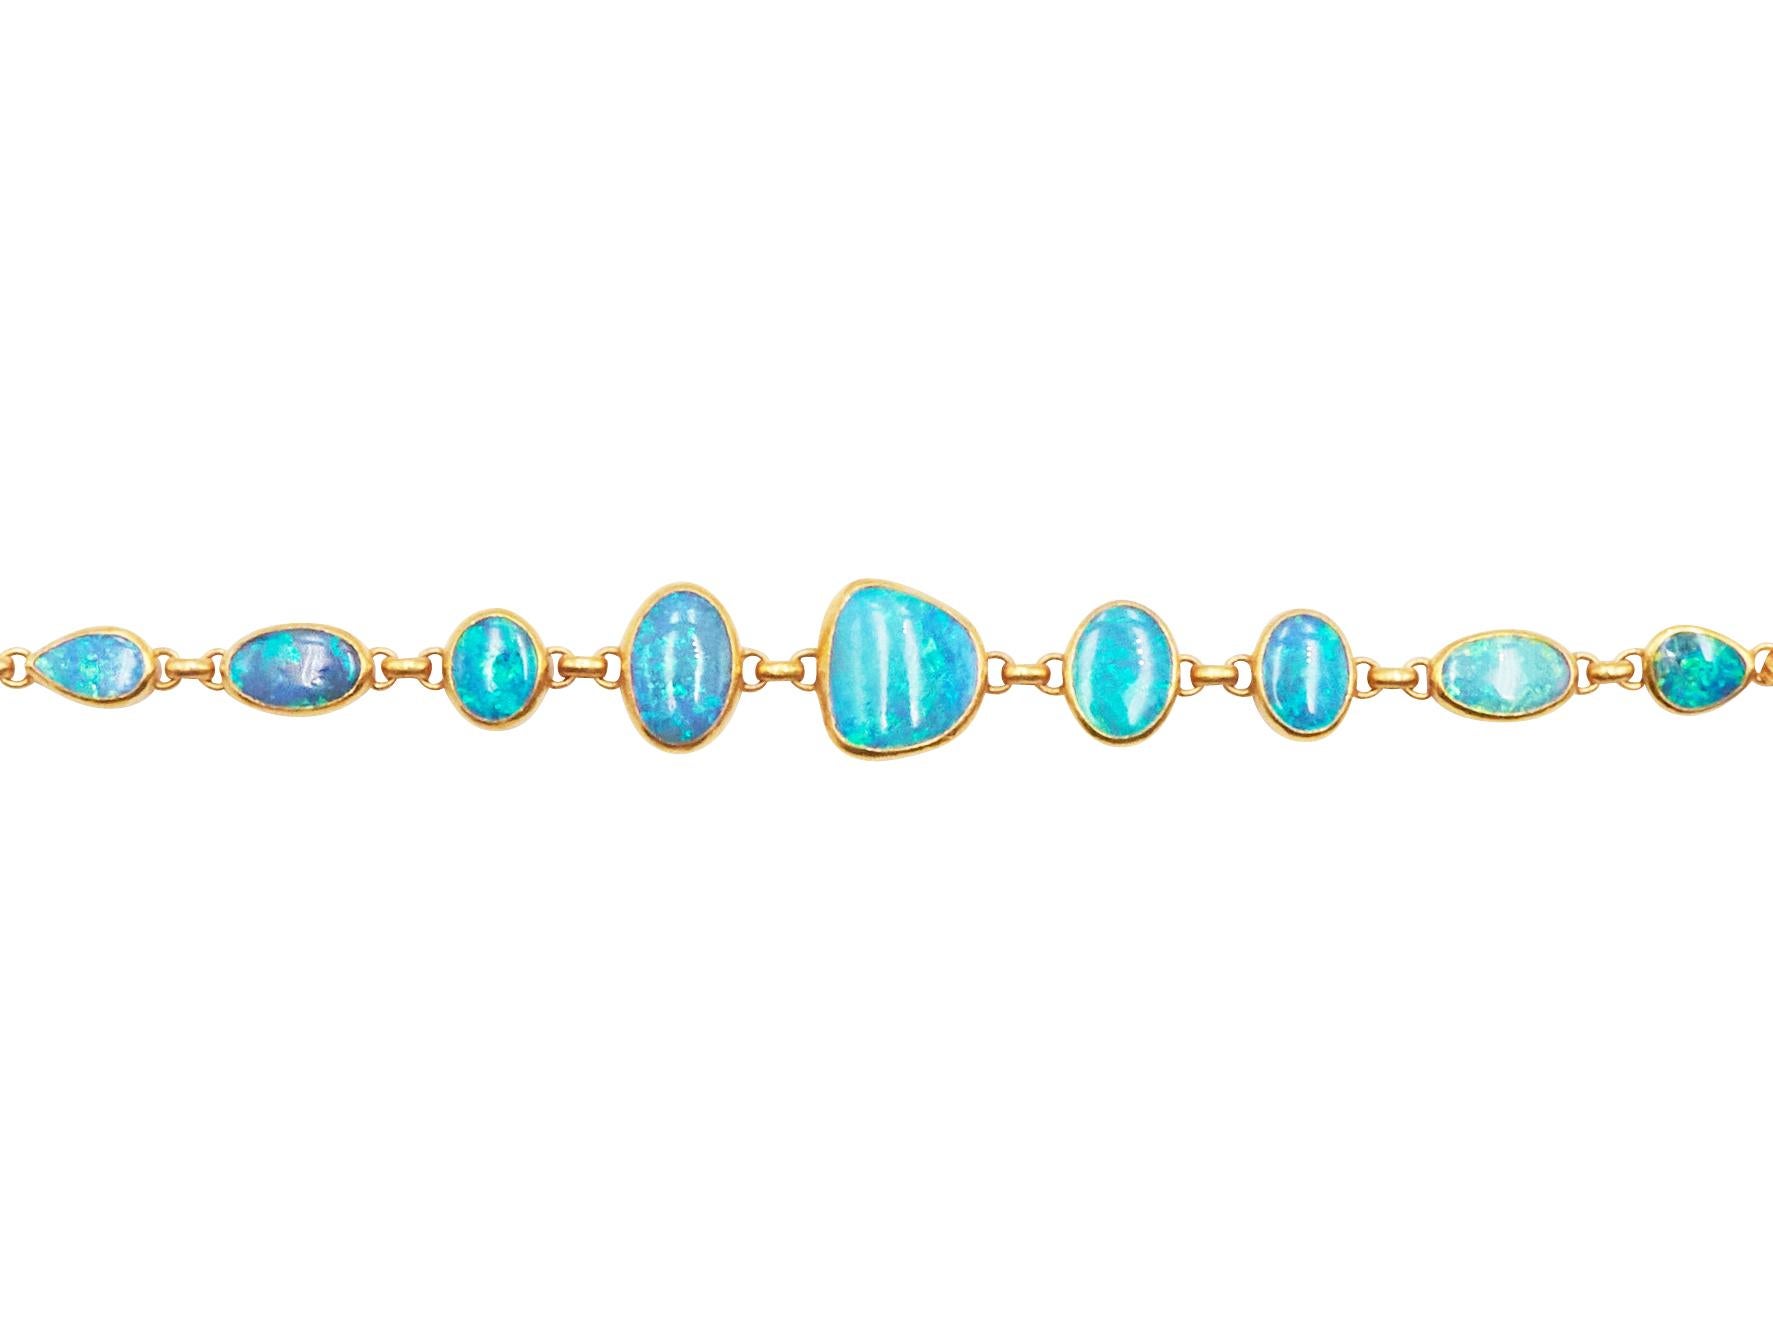 GURHAN all around one-of-a-kind bracelet in 24 Karat hammered yellow gold featuring (9) mixed sized and mixed shaped cabochon Australian Opals, 21.70 cts. Adjustable length from 7.5